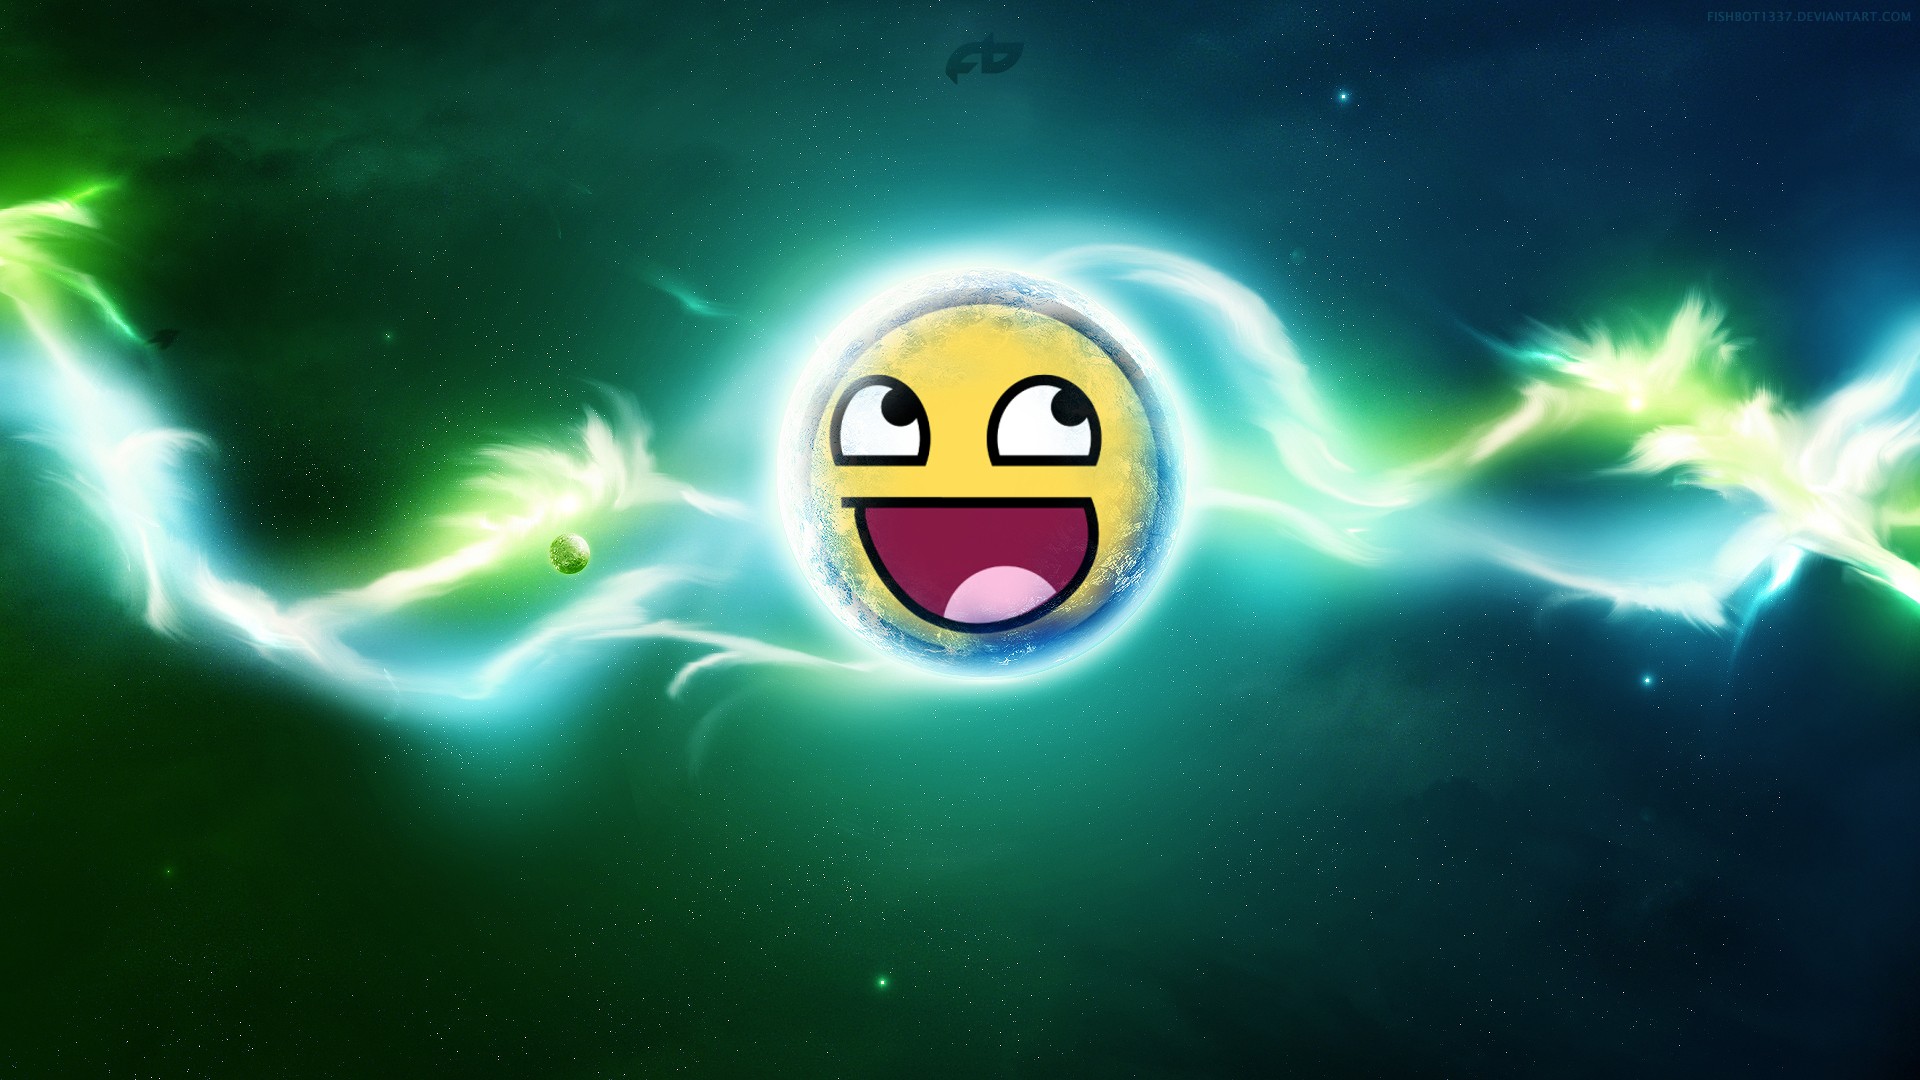 Awesome Face Space Space Art Digital Art 1920x1080